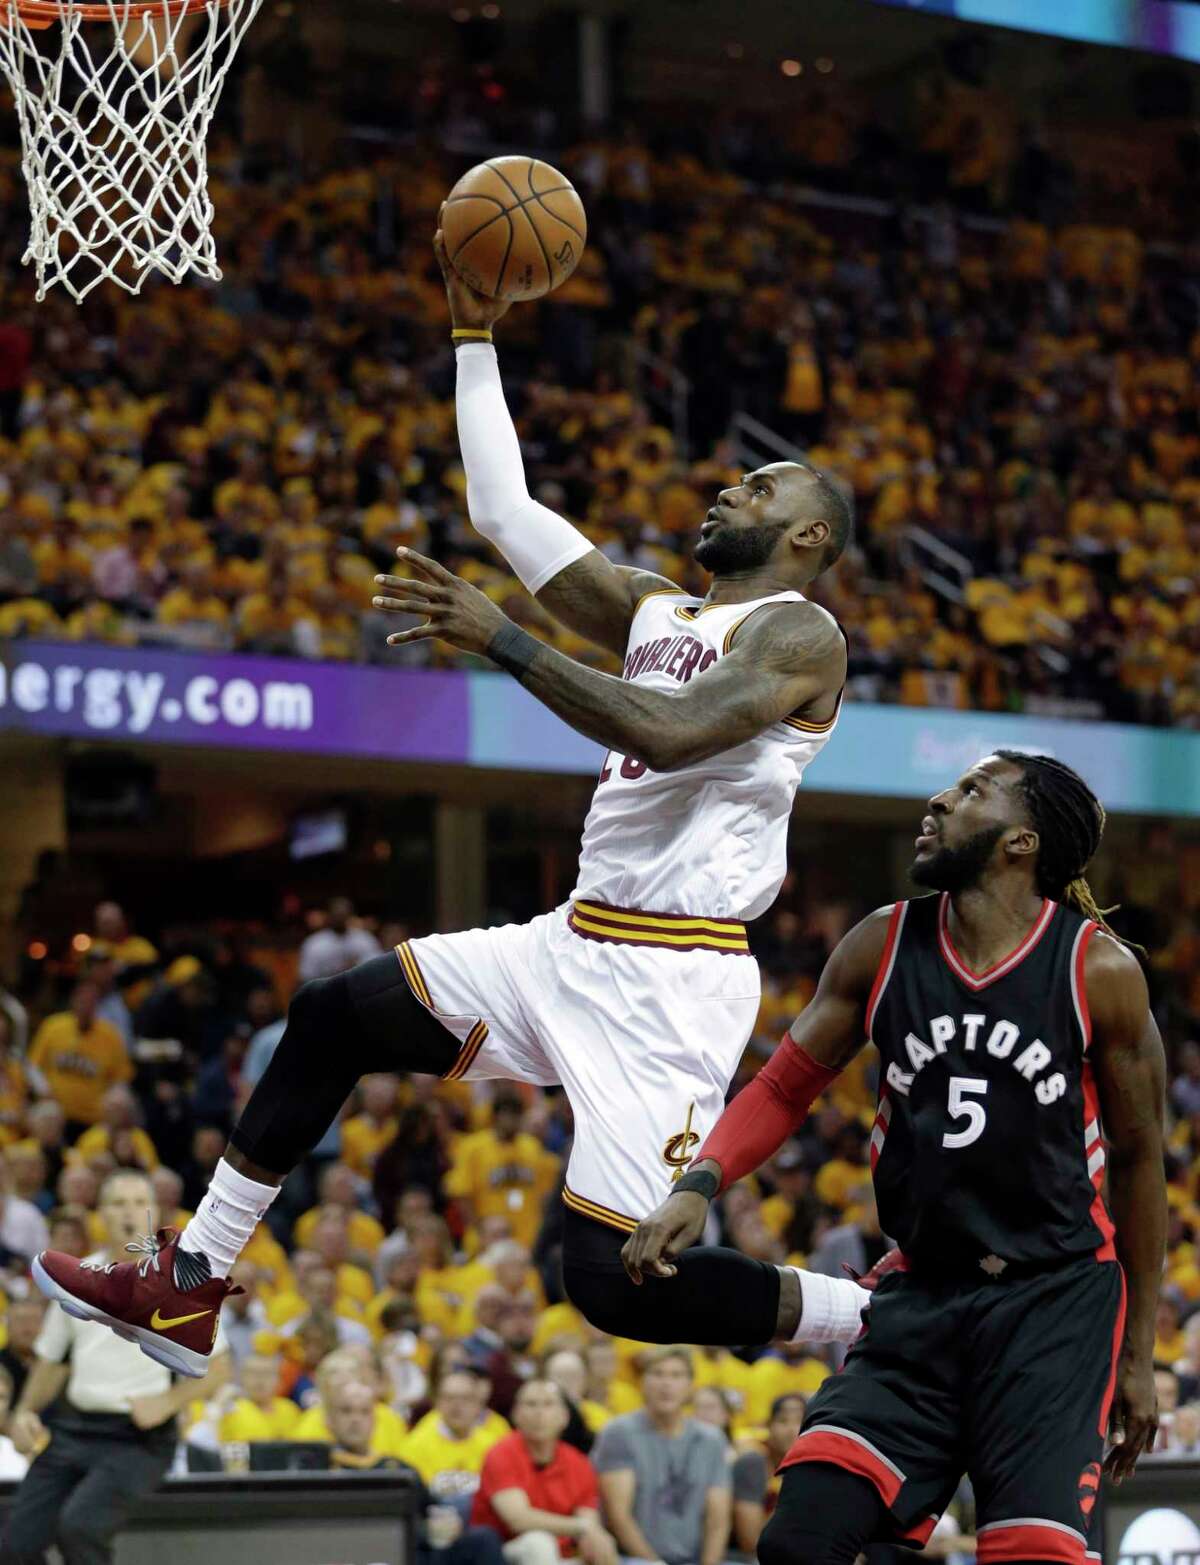 FILE - In this May 1, 2017, file photo, Cleveland Cavaliers' LeBron James (23) drives past Toronto Raptors' DeMarre Carroll (5) in the first half in Game 1 of a second-round NBA basketball playoff series, in Cleveland. Kevin Durant looks at LeBron James from afar and marvels at how the Cavs main man keeps finding a way to take his game to another level, year after year.(AP Photo/Tony Dejak, File)